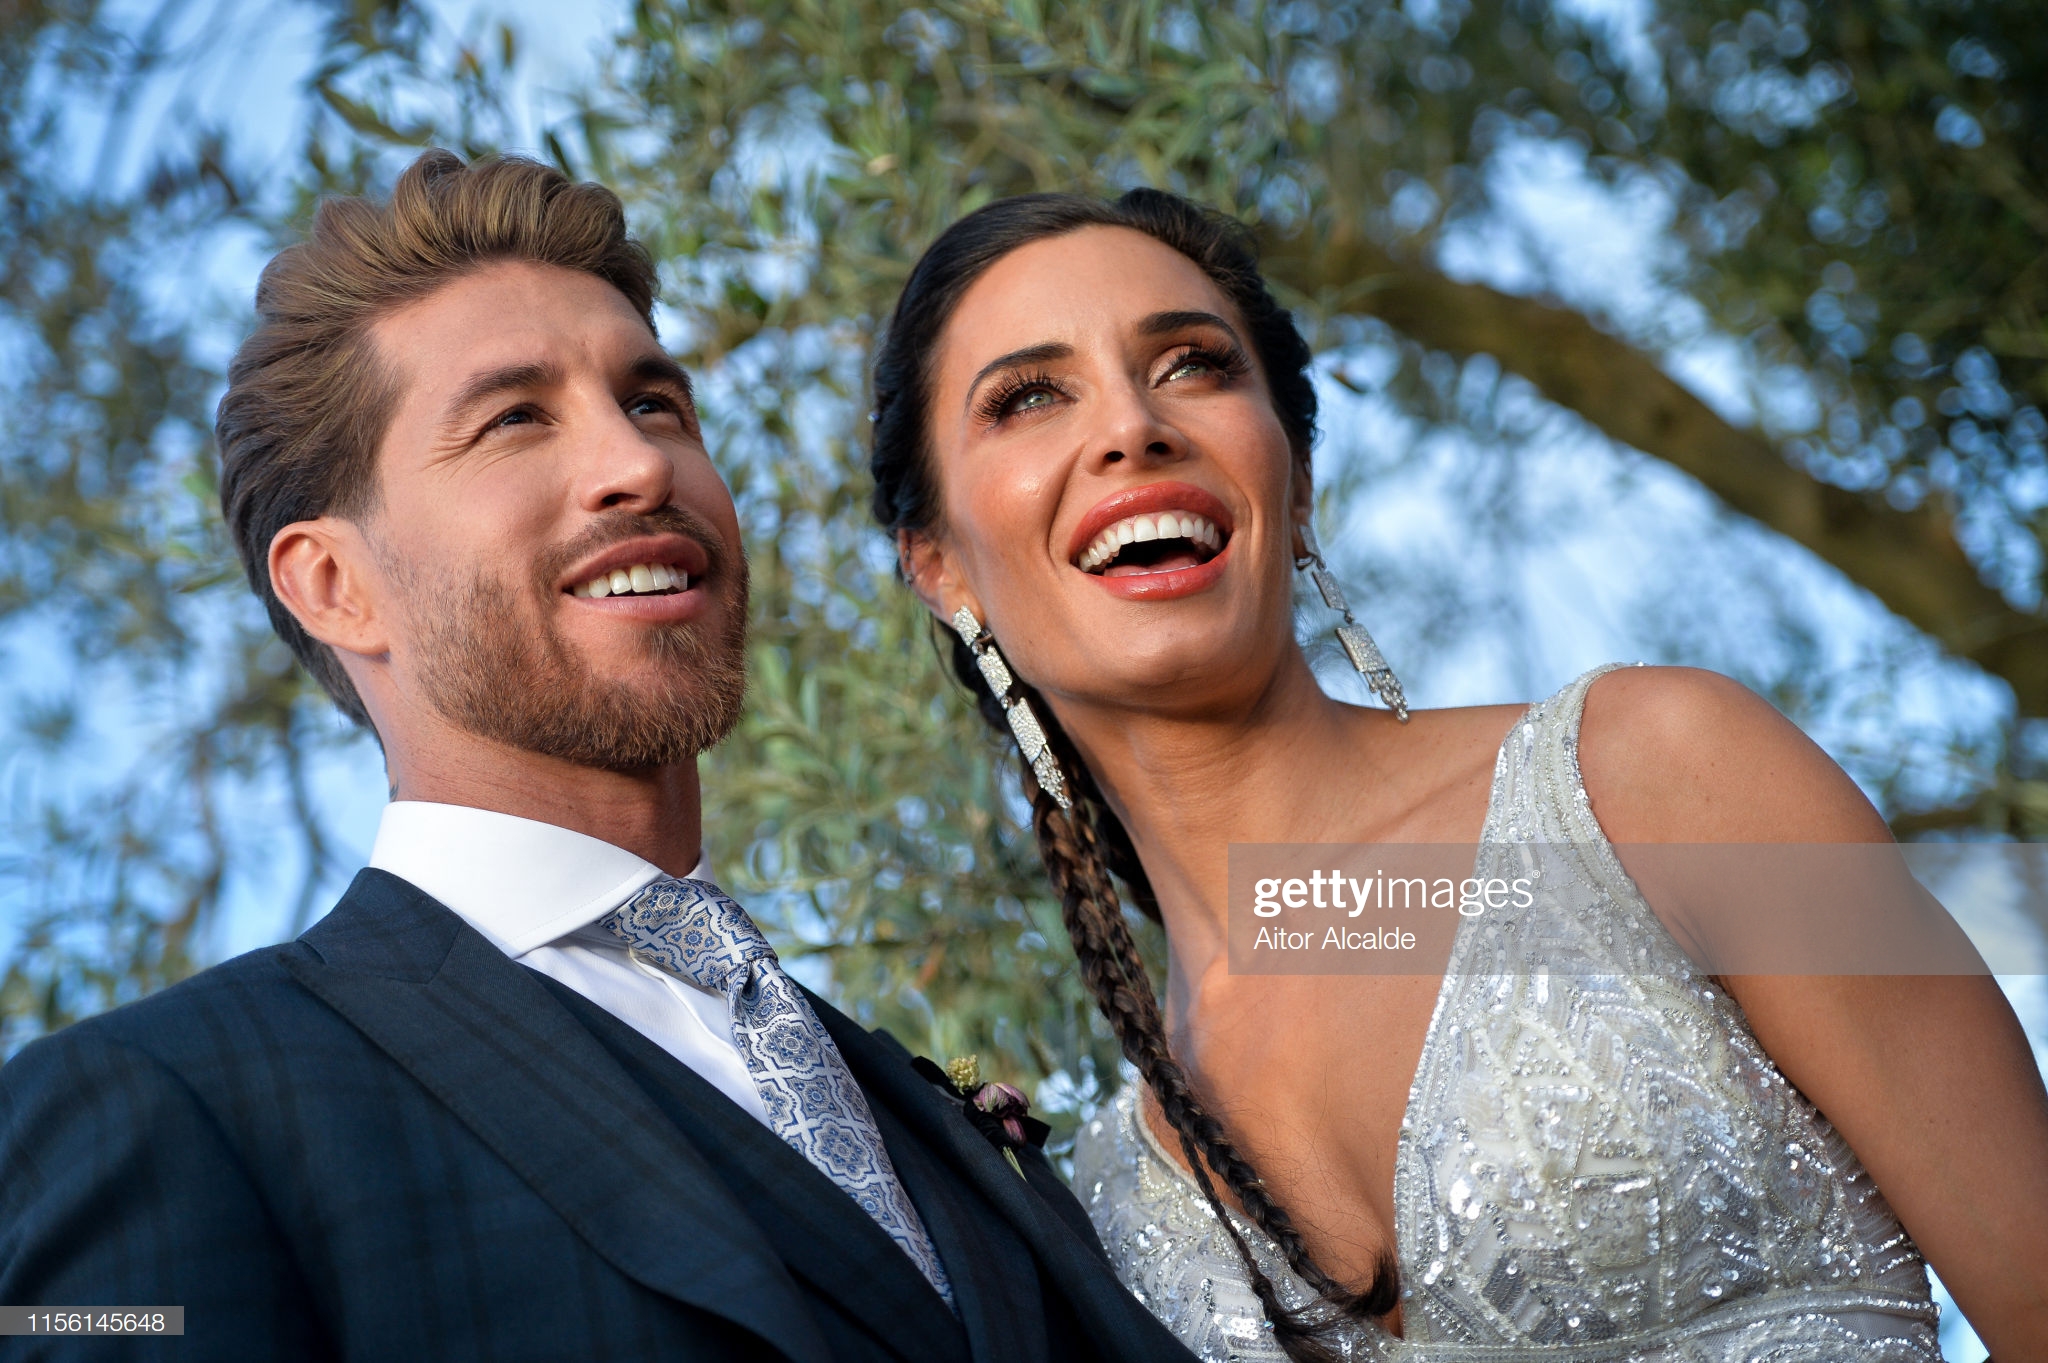 gettyimages-1156145648-2048x2048.jpg